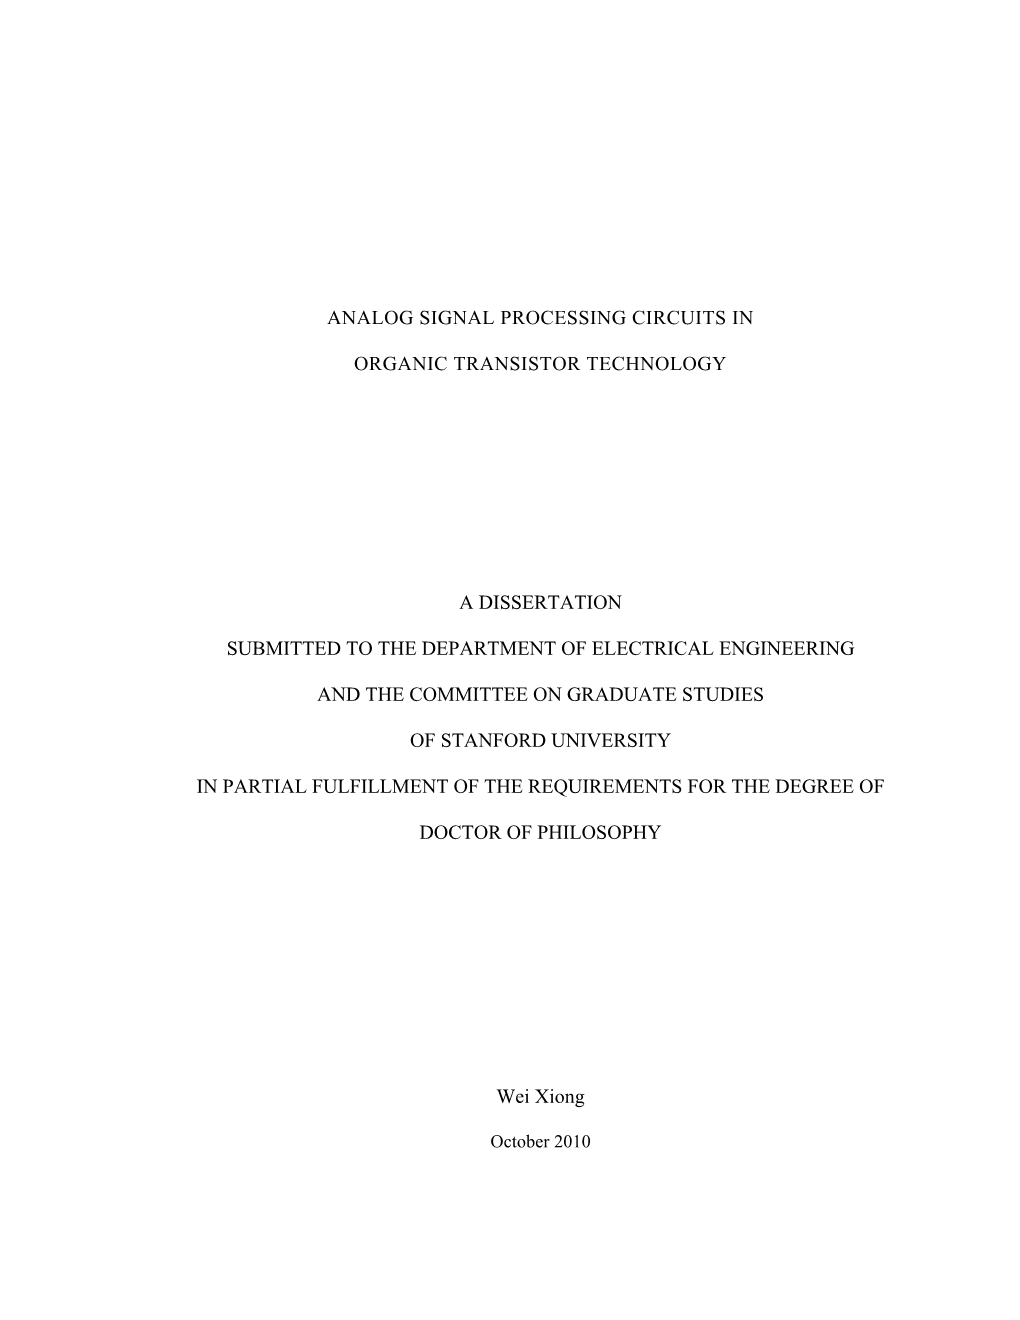 Analog Signal Processing Circuits in Organic Transistor Technology a Dissertation Submitted to the Department of Electrical Engi